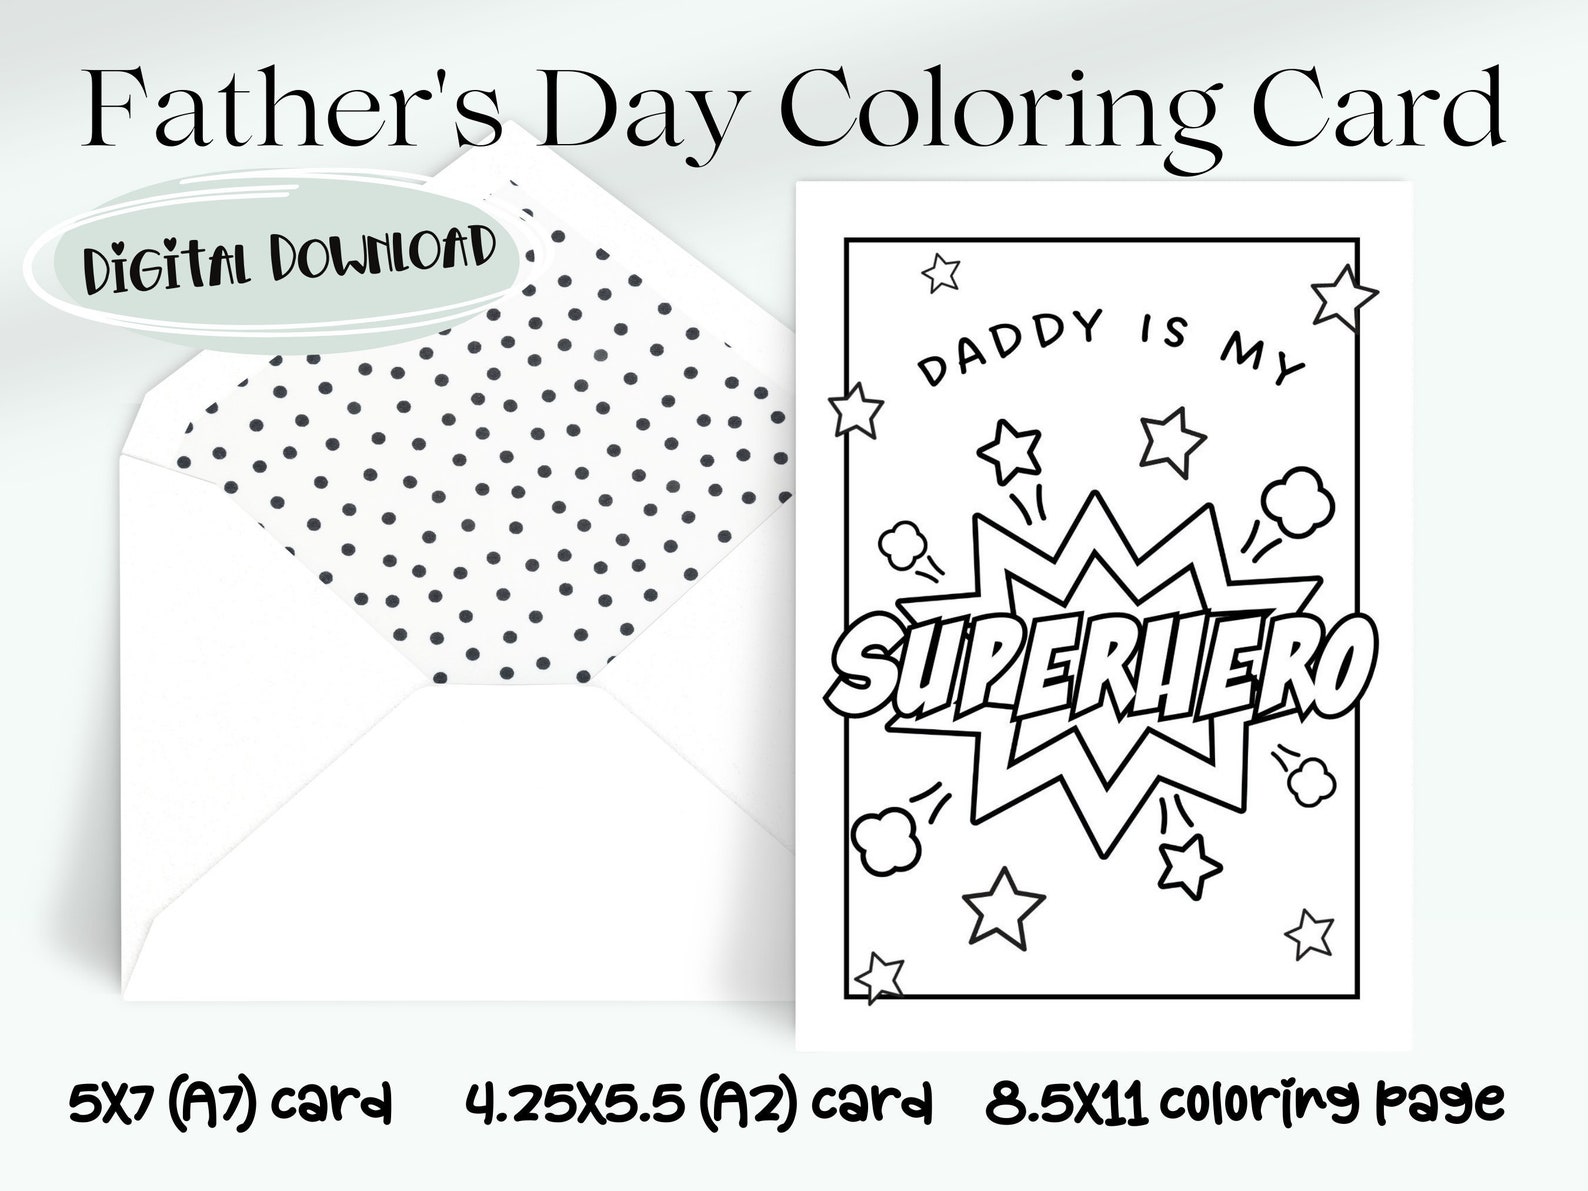 printable-diy-father-s-day-card-coloring-card-for-dad-from-etsy